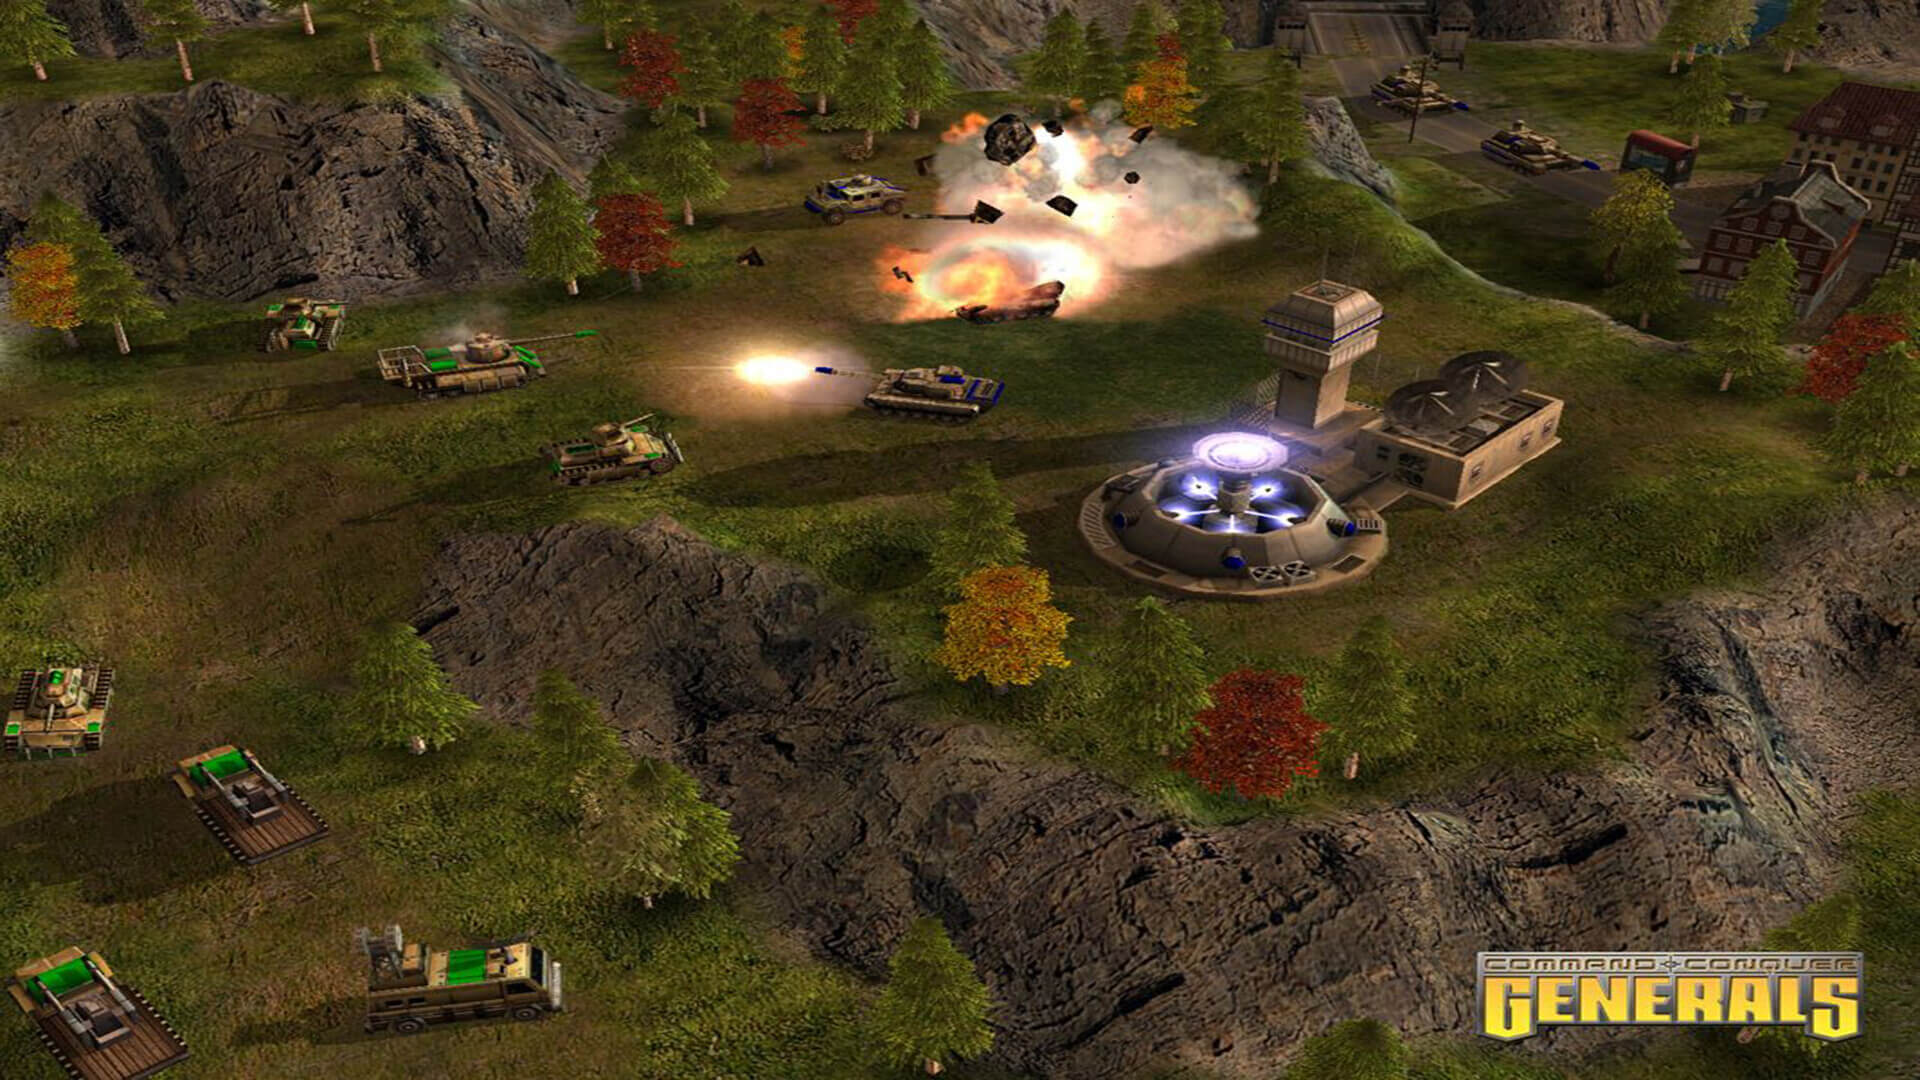 The Series Topped it Off With Command & Conquer: Generals 